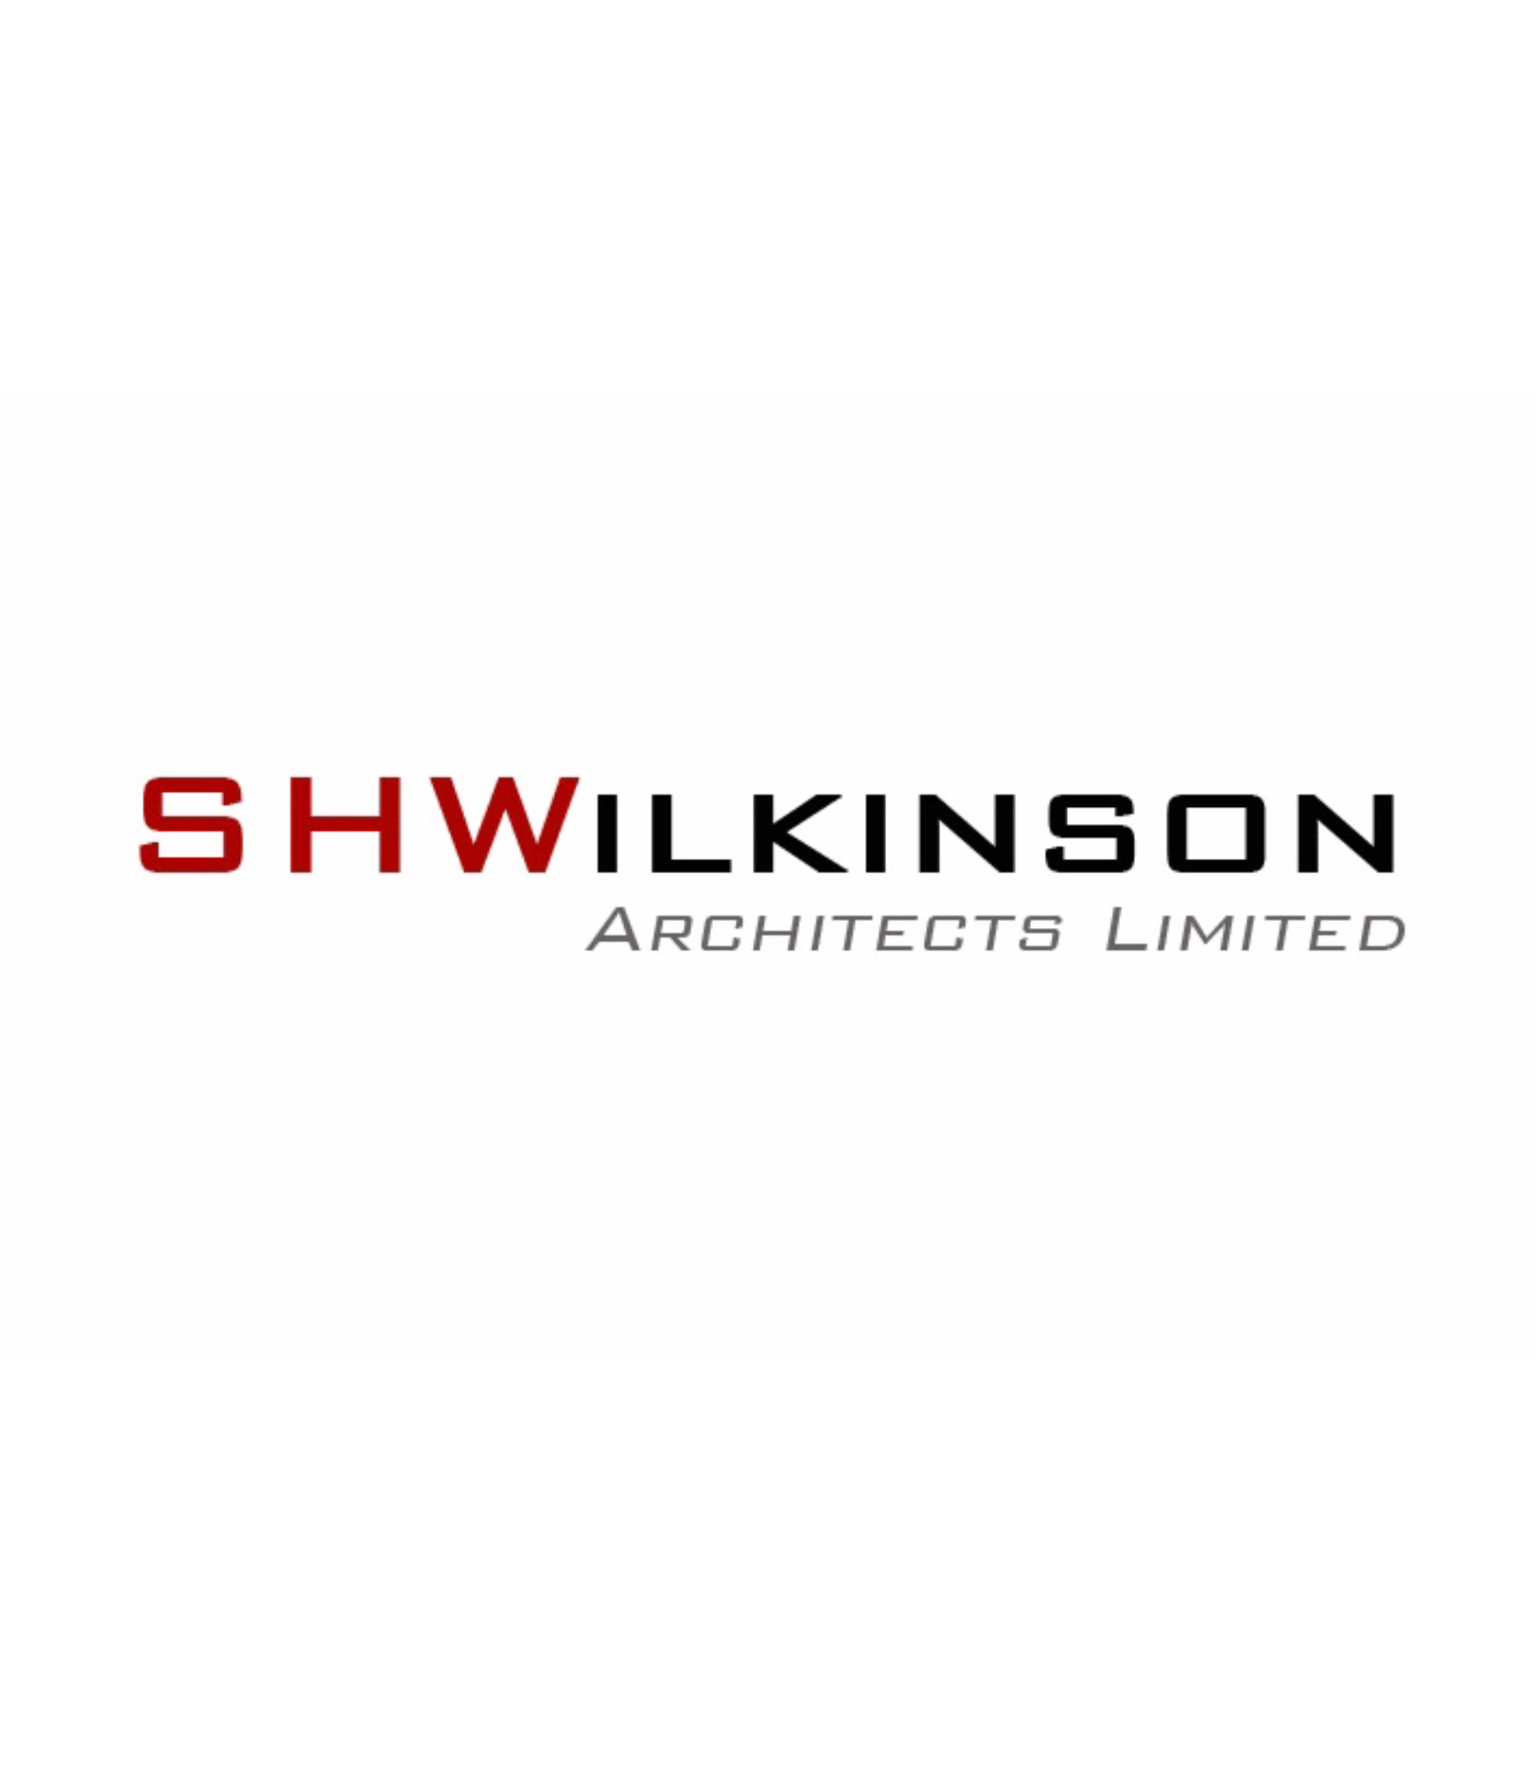 Logo of SHWilkinson Architects Limited